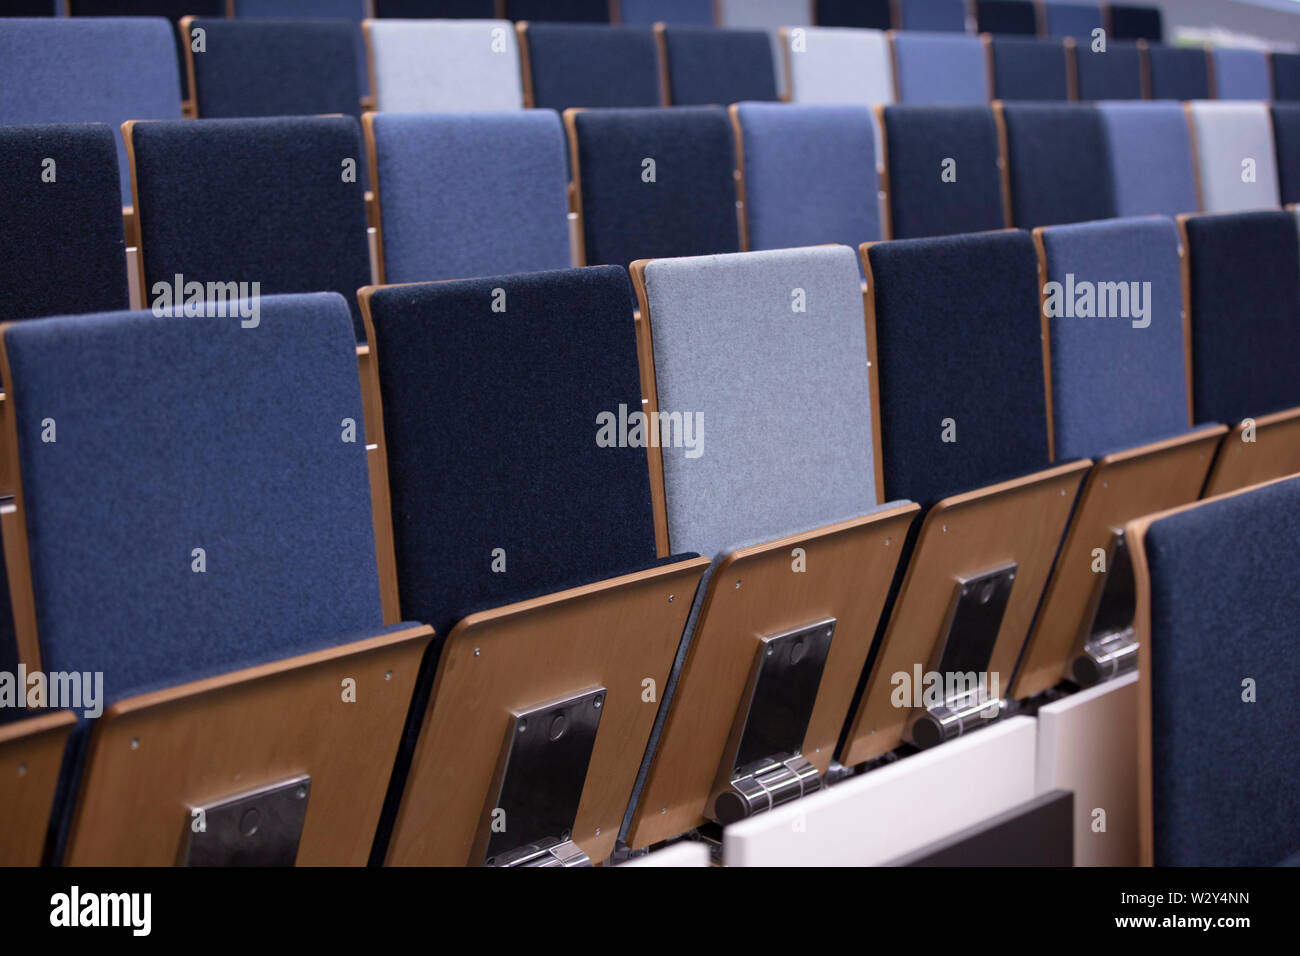 Rows of empty blue chairs in a conference room Stock Photo